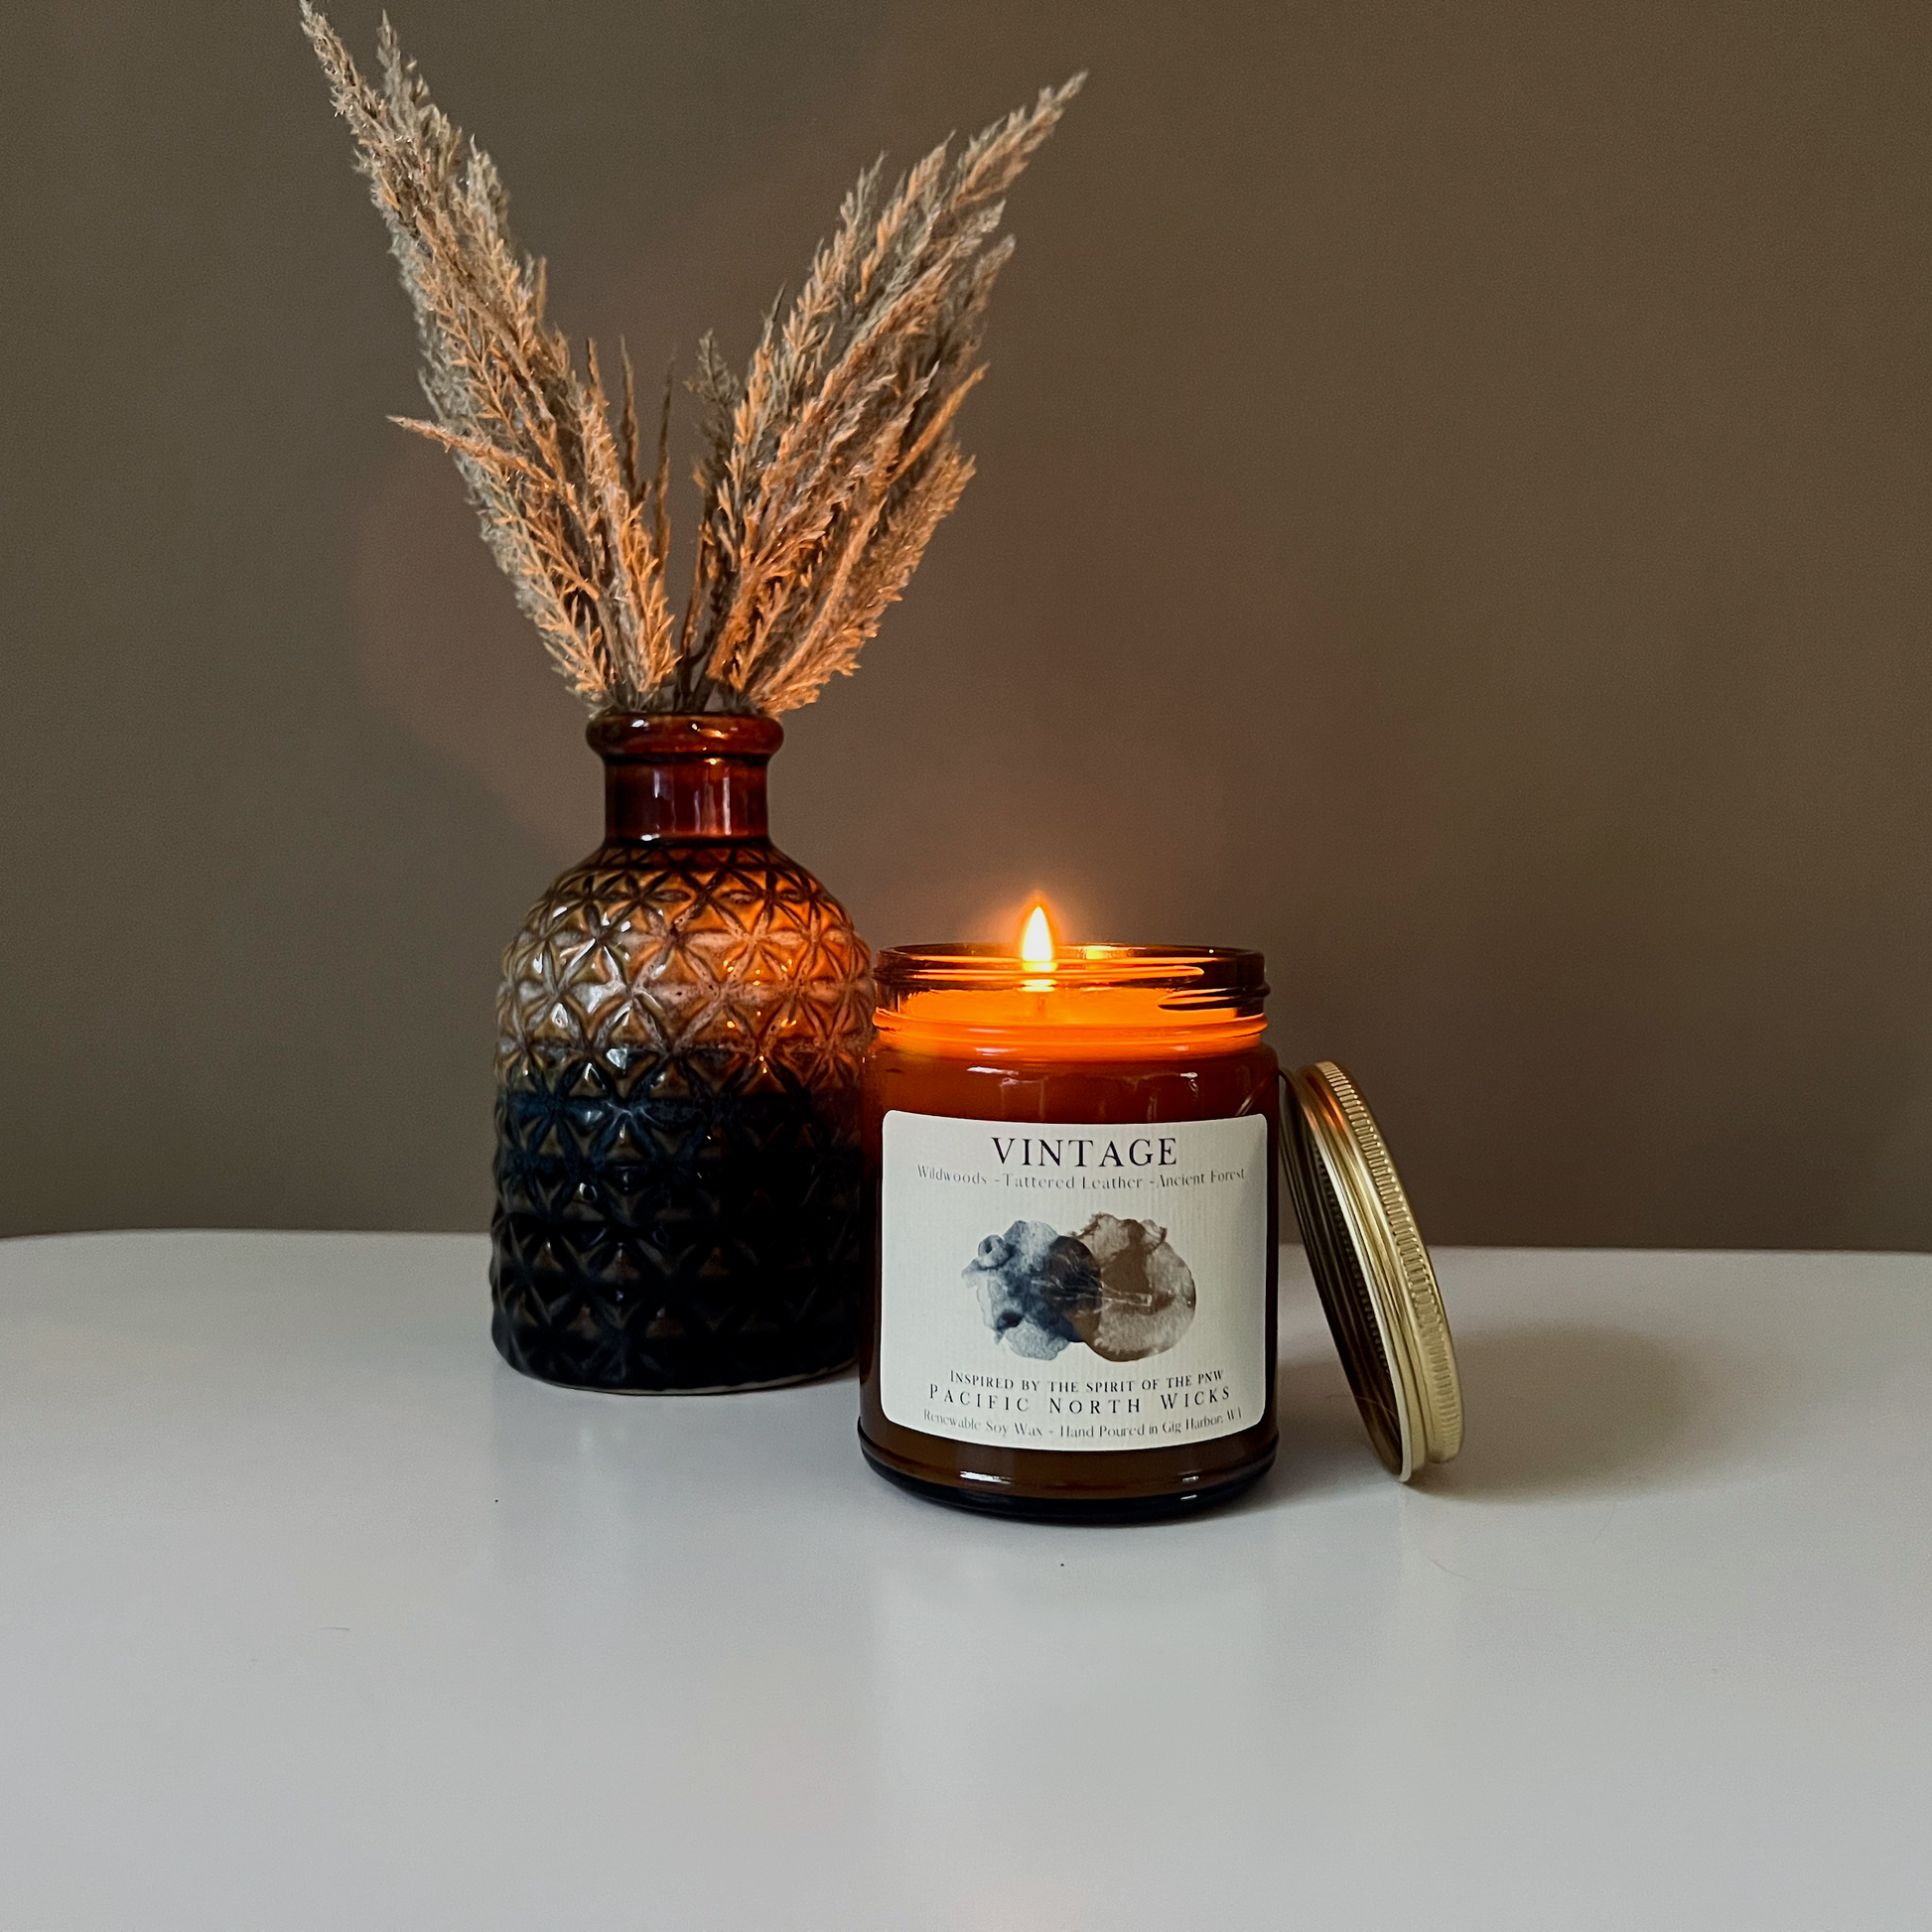 Vintage Candle burning with modern Home Decor